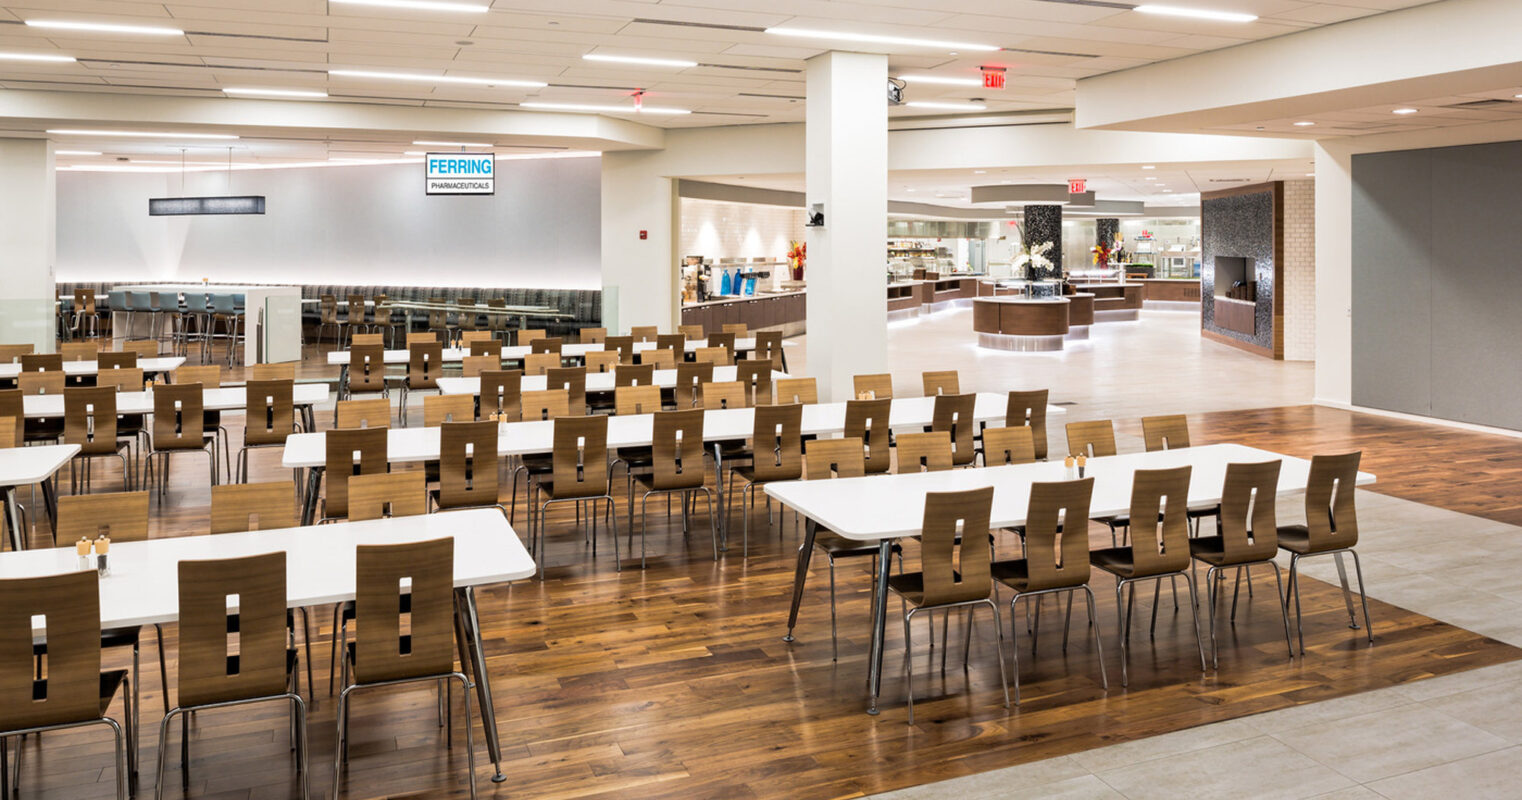 Spacious, modern cafeteria interior with rows of parallel brown tables and chairs on polished wooden flooring. White ceiling with square red accents and recessed lighting complements the open, airy atmosphere. A serving area with counters is visible in the background.